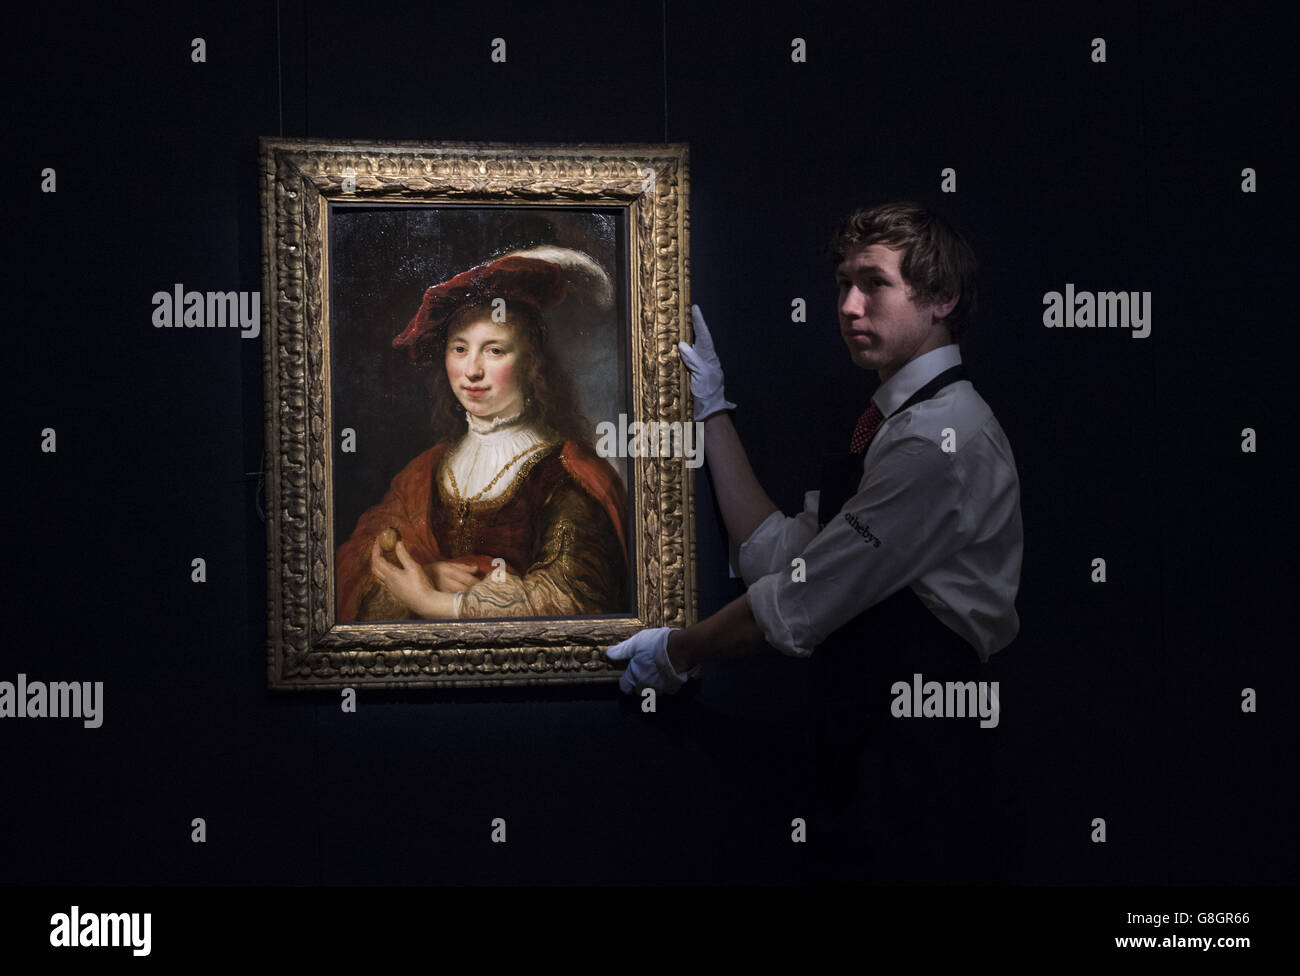 A member of staff adjusts 'A tronie of a young woman' by Govert Flinck, estimated at £200,000 to £300,000, during a press preview for highlights of Sotheby's forthcoming sale of Old Master and British Paintings due to take place on December 9 in London. Stock Photo